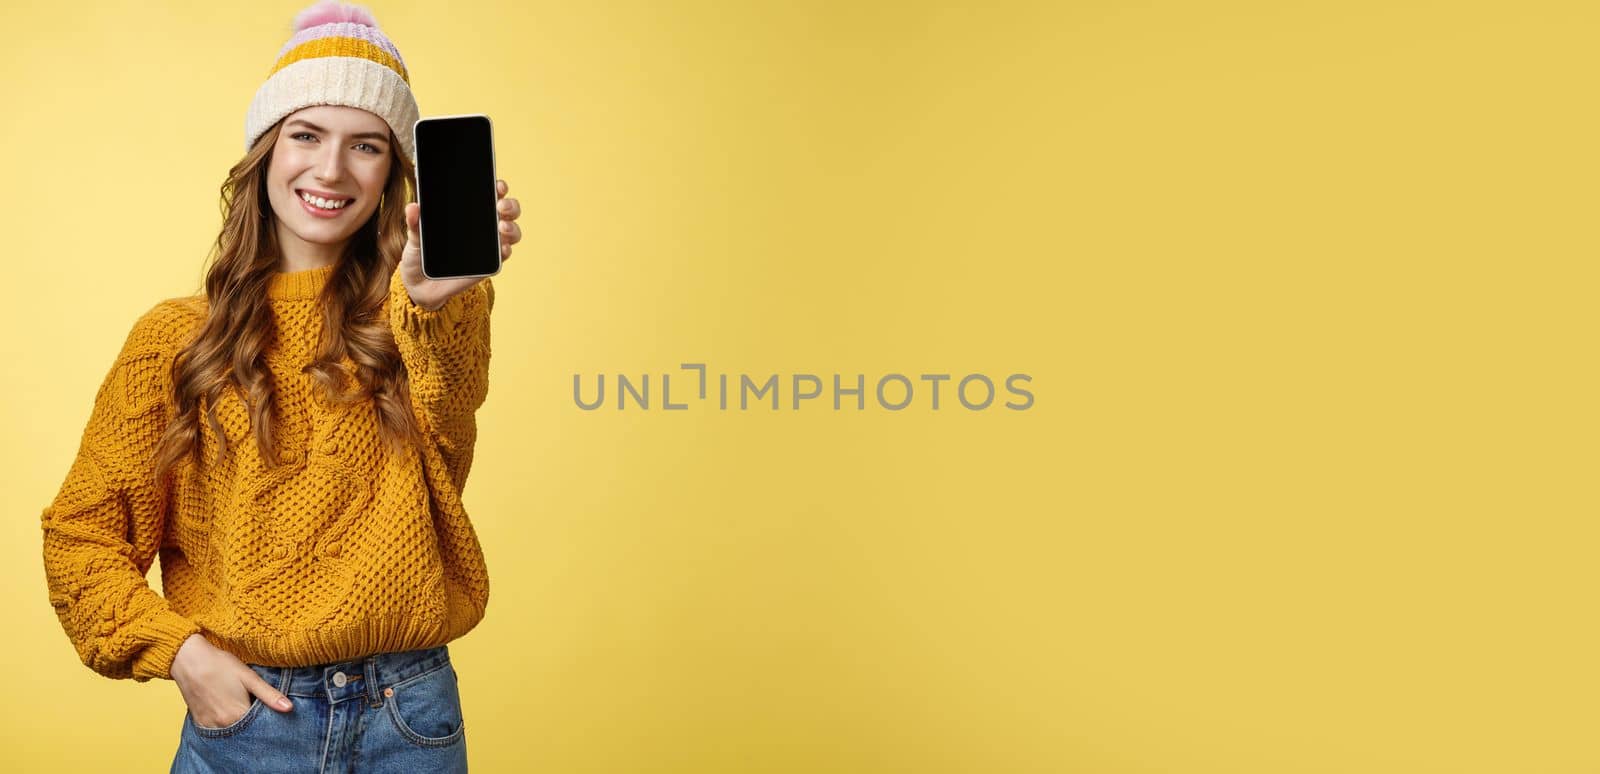 Charming outgoing smiling trendy girl extend arm showing you brand new smartphone, display grinning satisfied consulting friend what filter put using app edit photo mobile phone, yellow background.